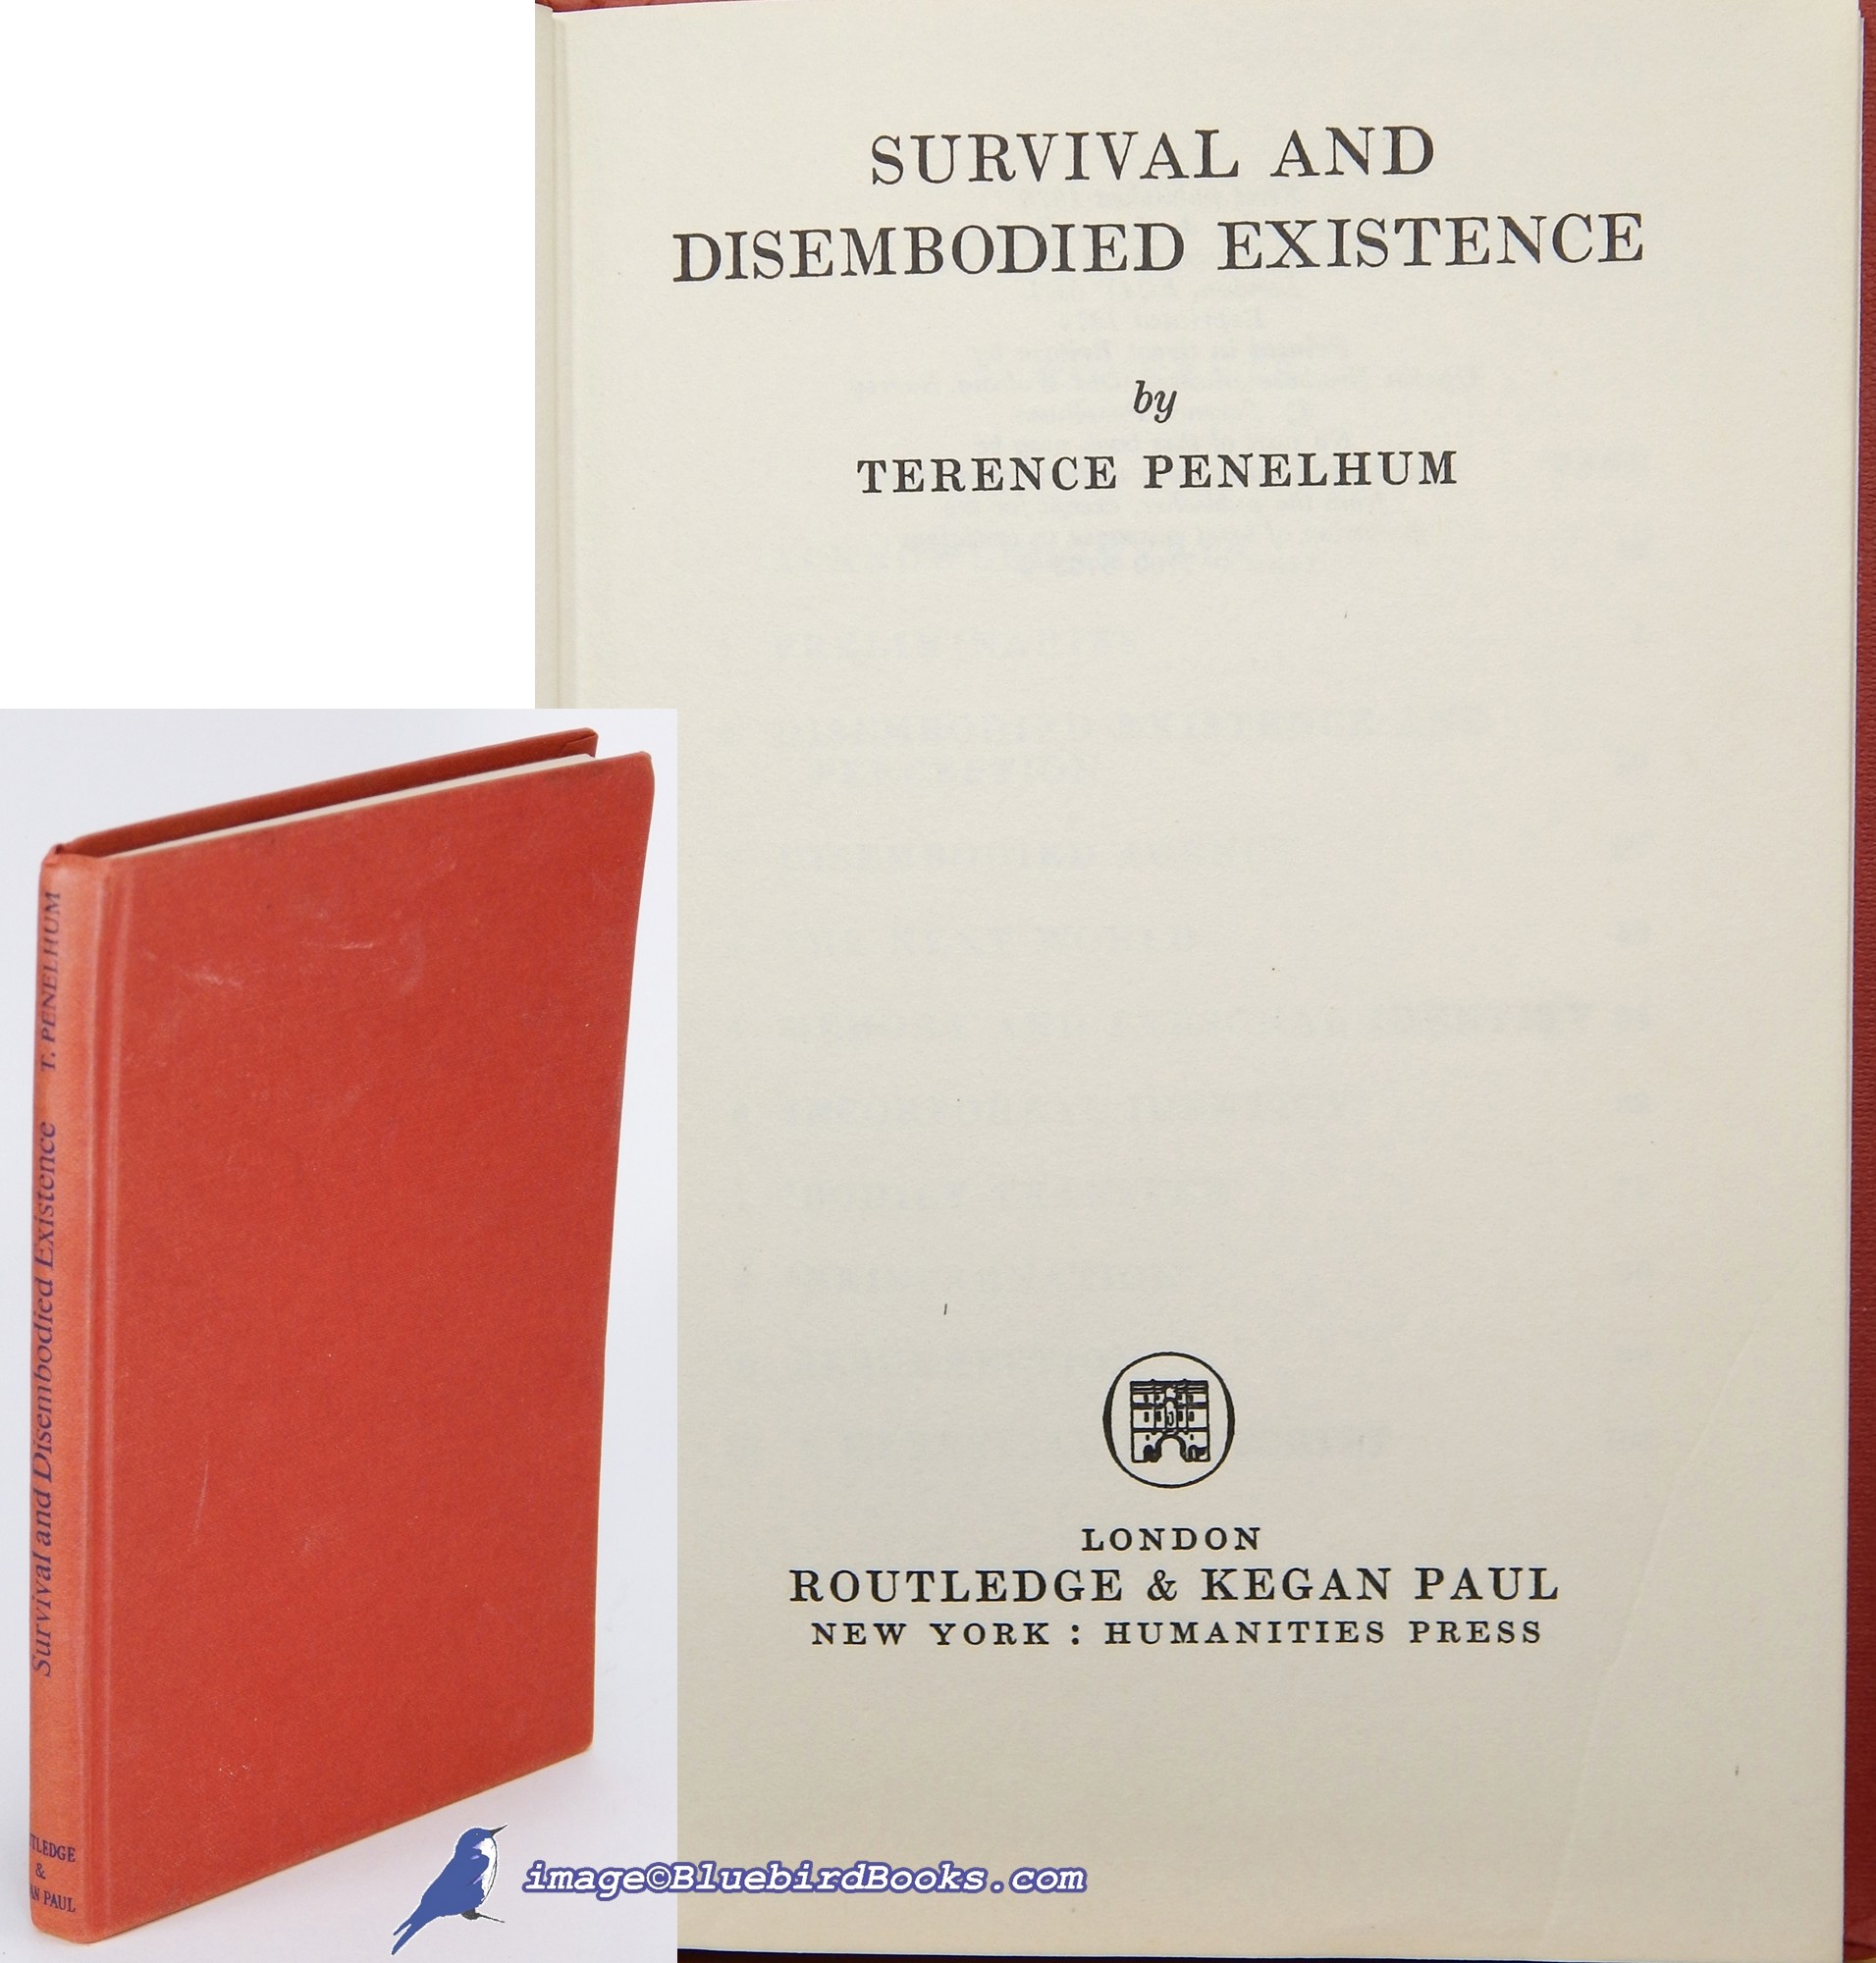 PENELHUM, TERENCE - Survival and Disembodied Existence (Studies in Philosophical Psychology)